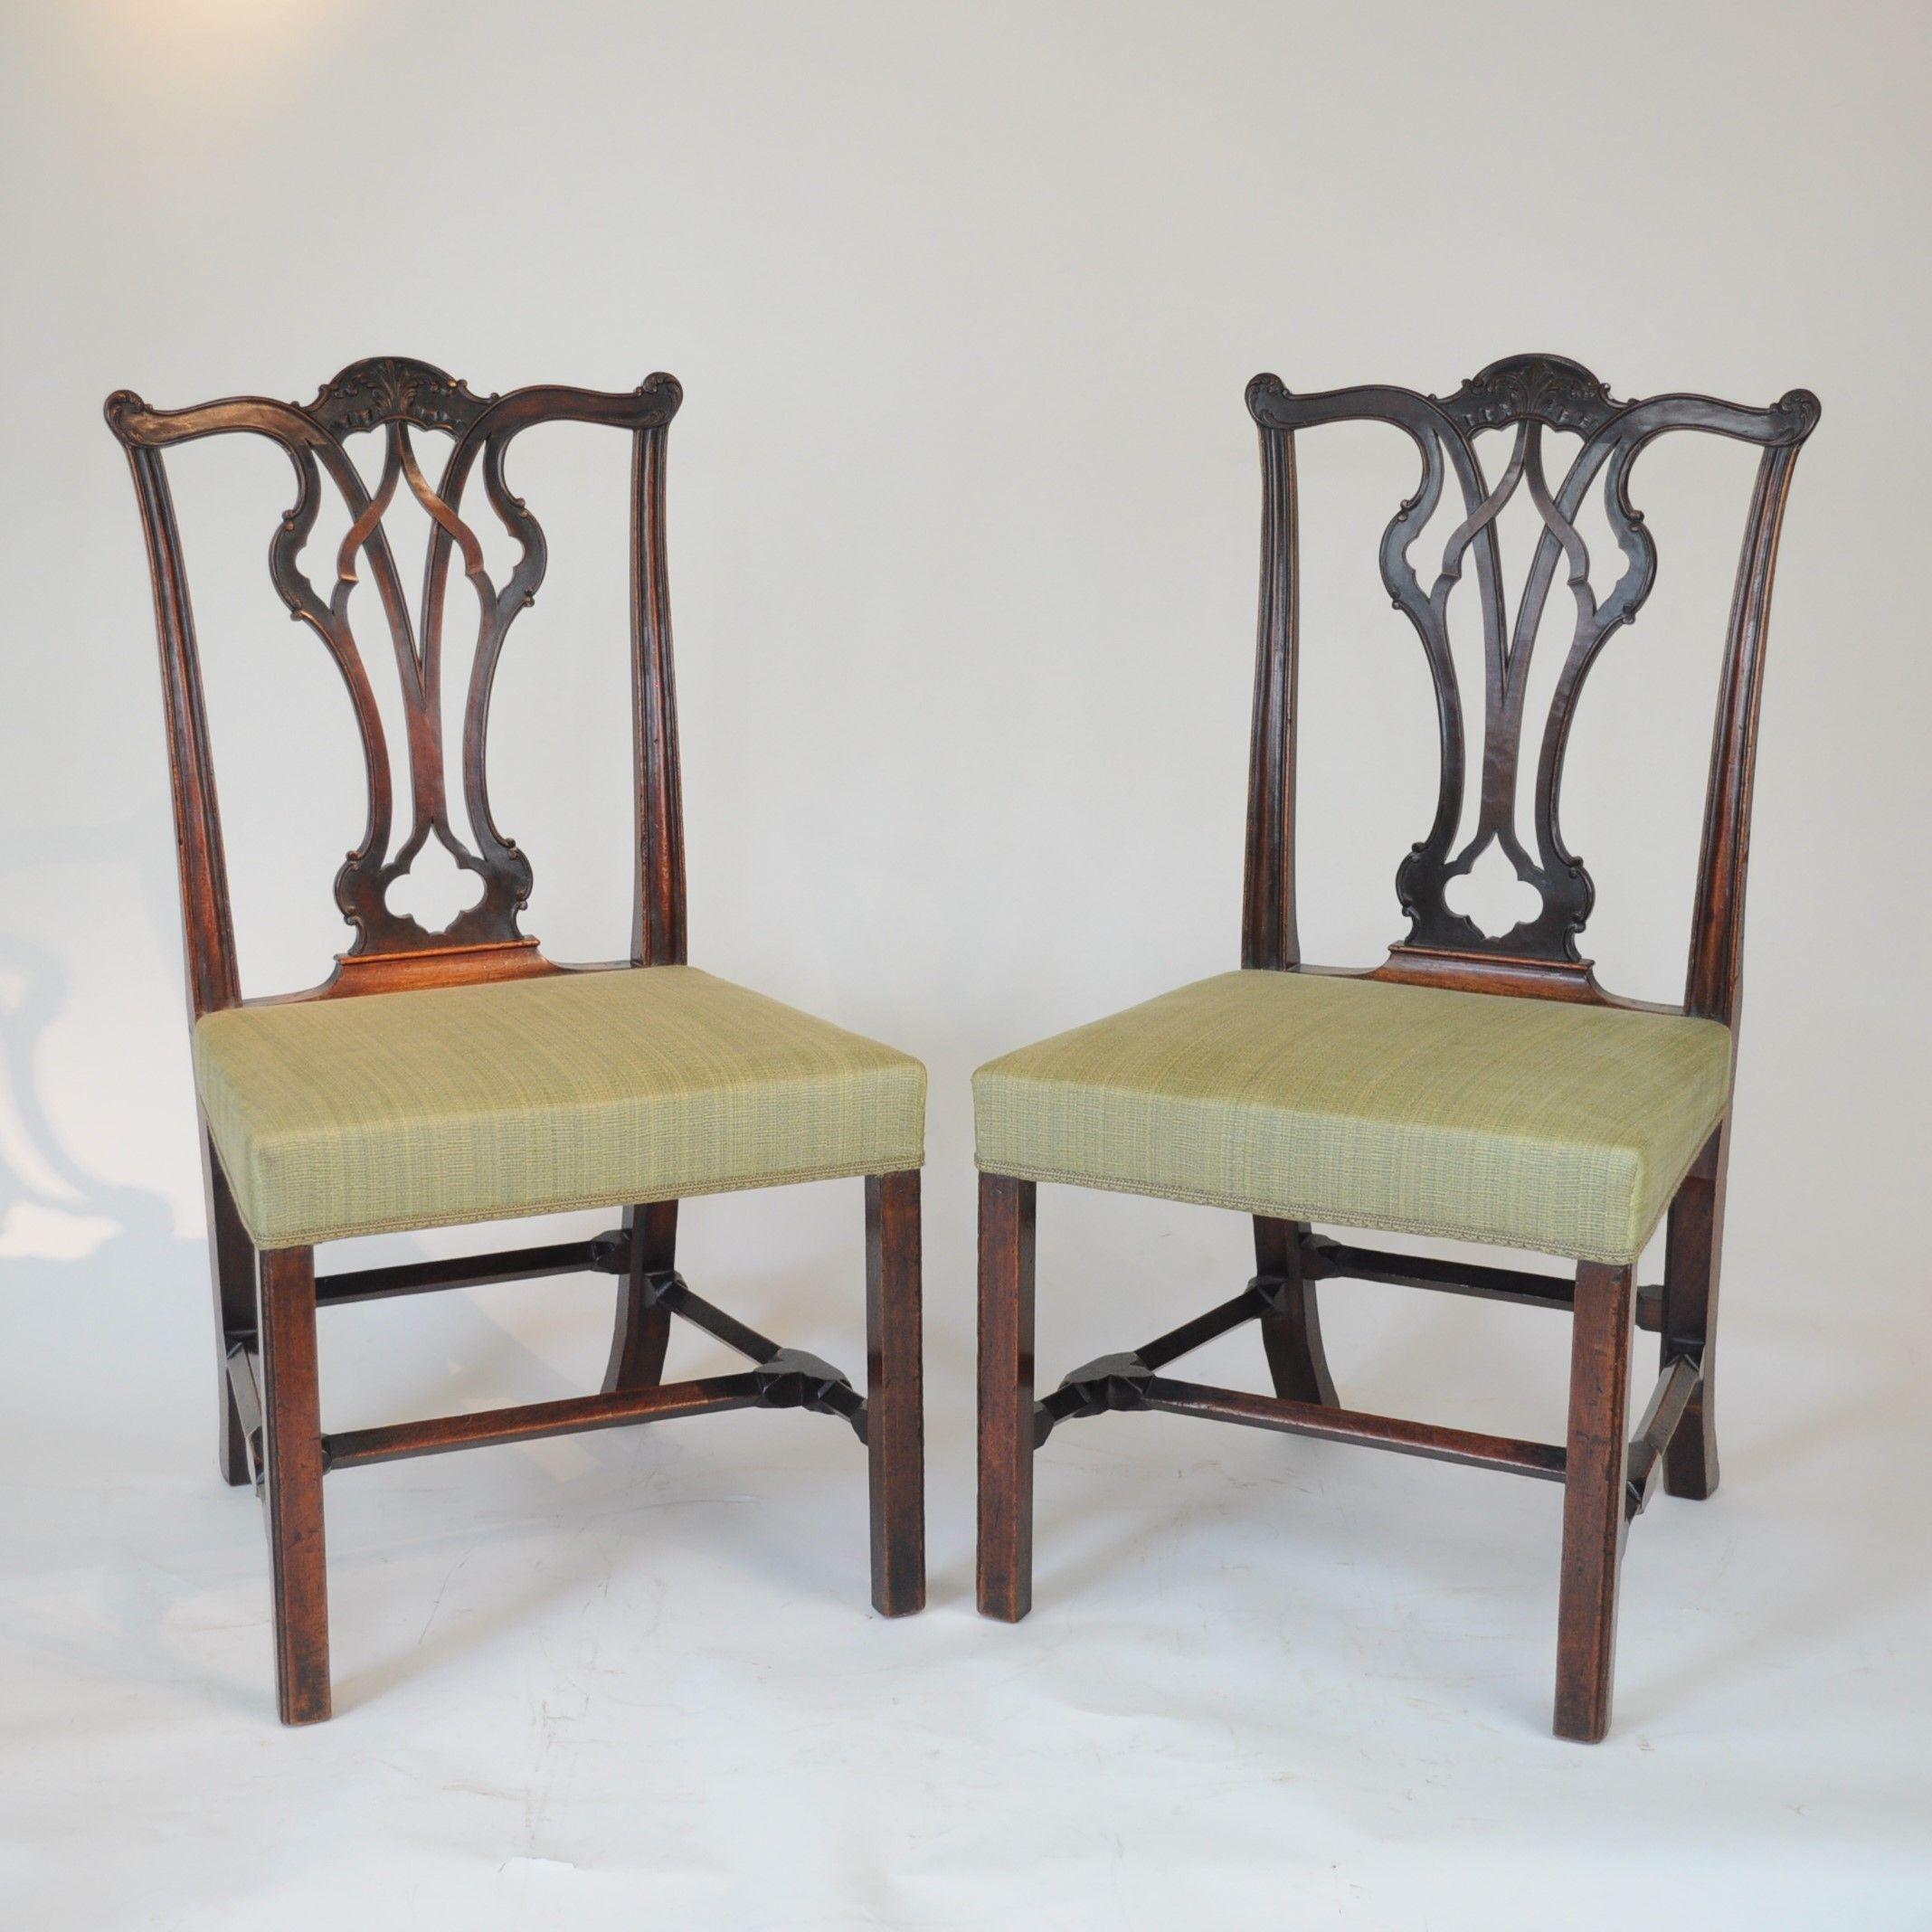 Fine pair of mid 18th century Mahogany, Chippendale inspired side chairs with carved serpentine cresting rails above leaf-carved open splats, with over-stuffed seats and standing on square chamfered legs with unusual square section stretchers set at